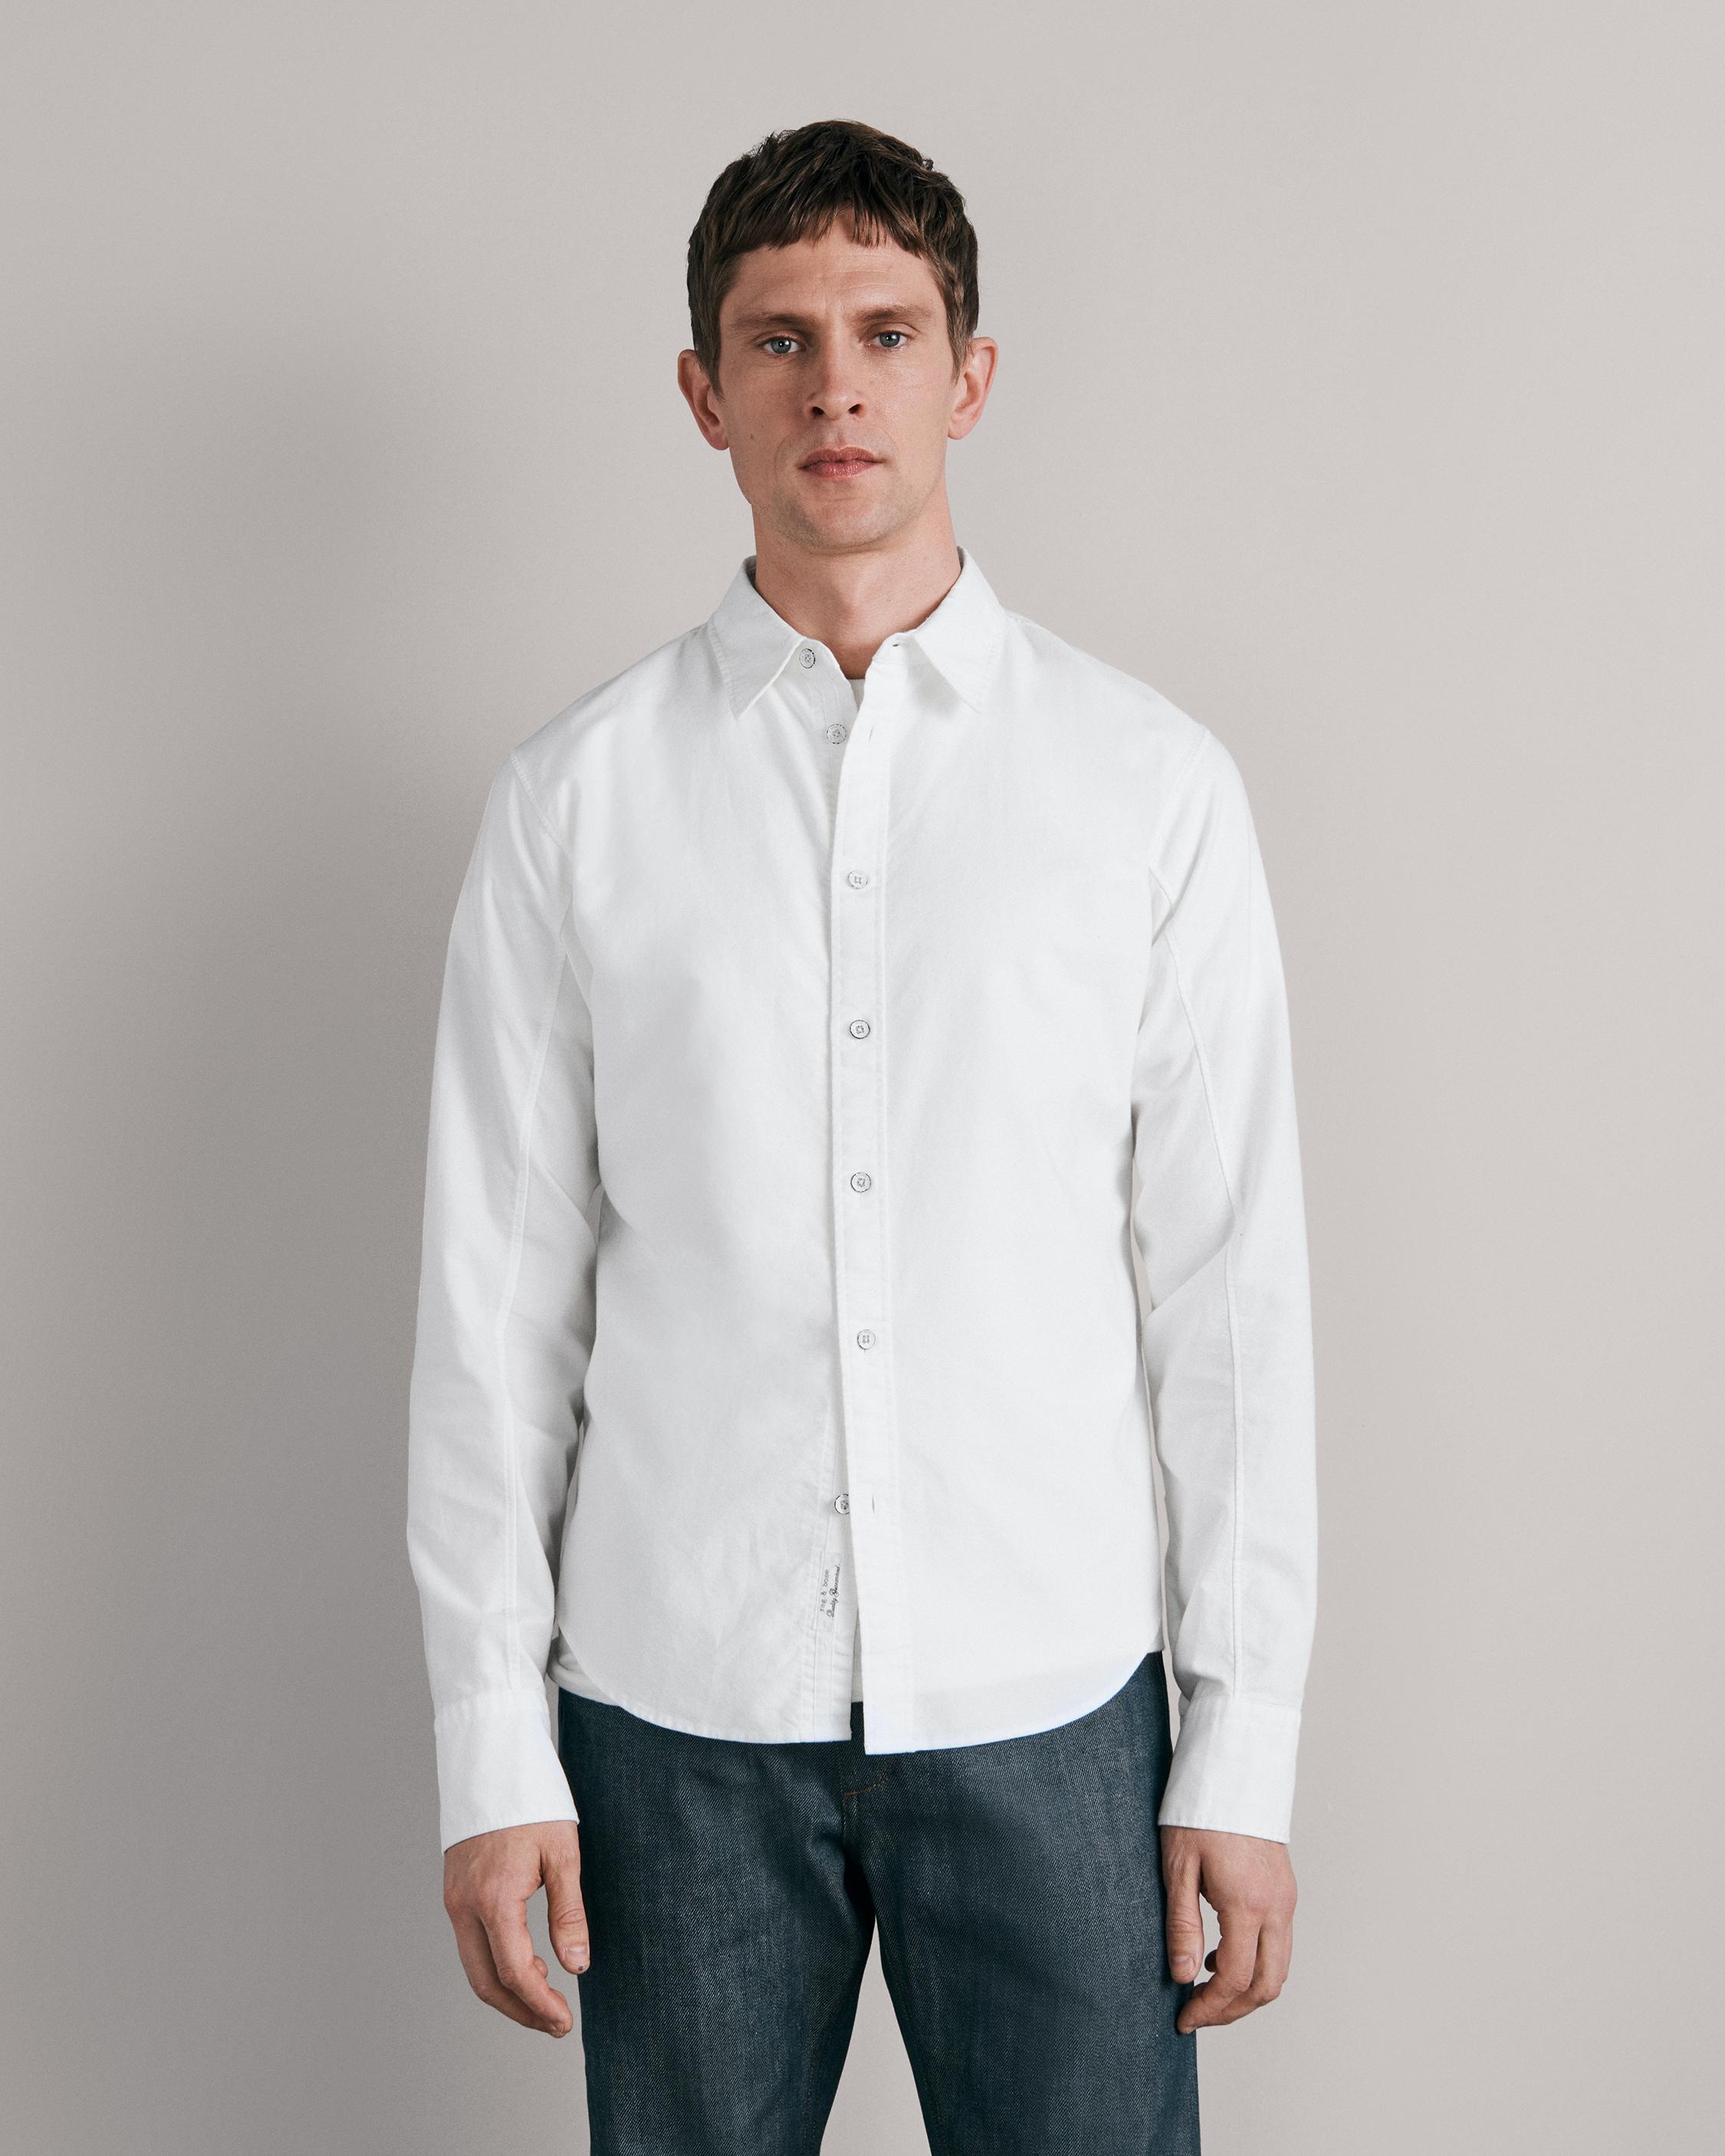 Fit 2 Engineered Cotton Oxford Shirt
Slim Fit Shirt - 2